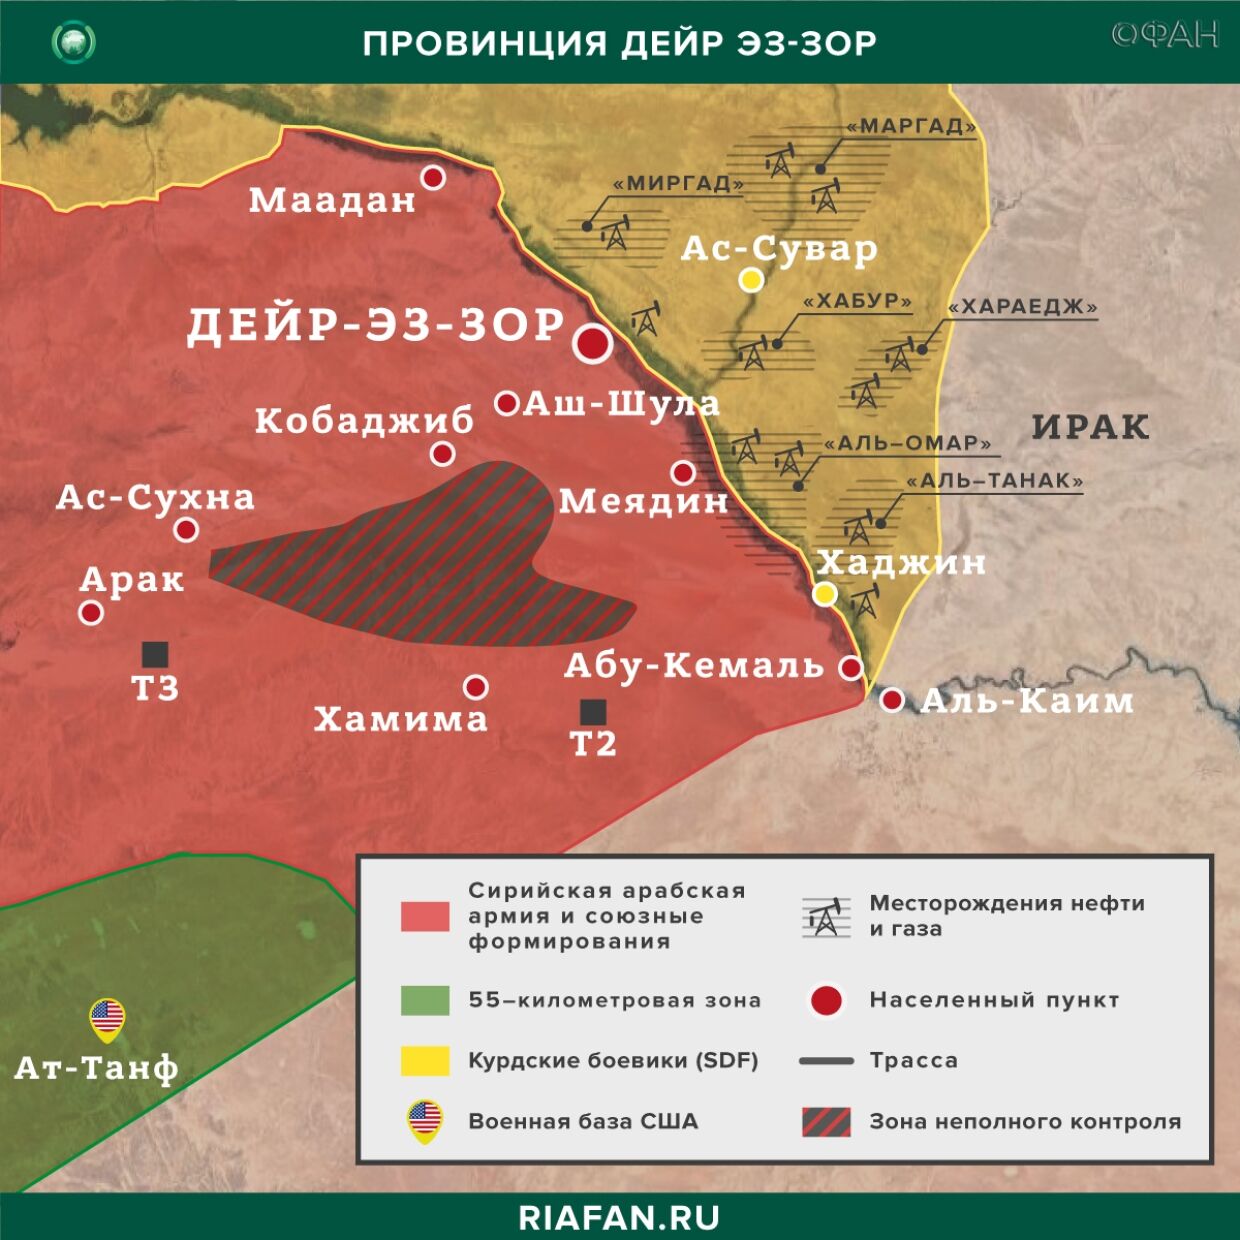 Syria news 5 June 19.30: SDF arrests in Deir ez-Zor on trumped-up charges, HTS * recognized as prohibited in the Russian Federation